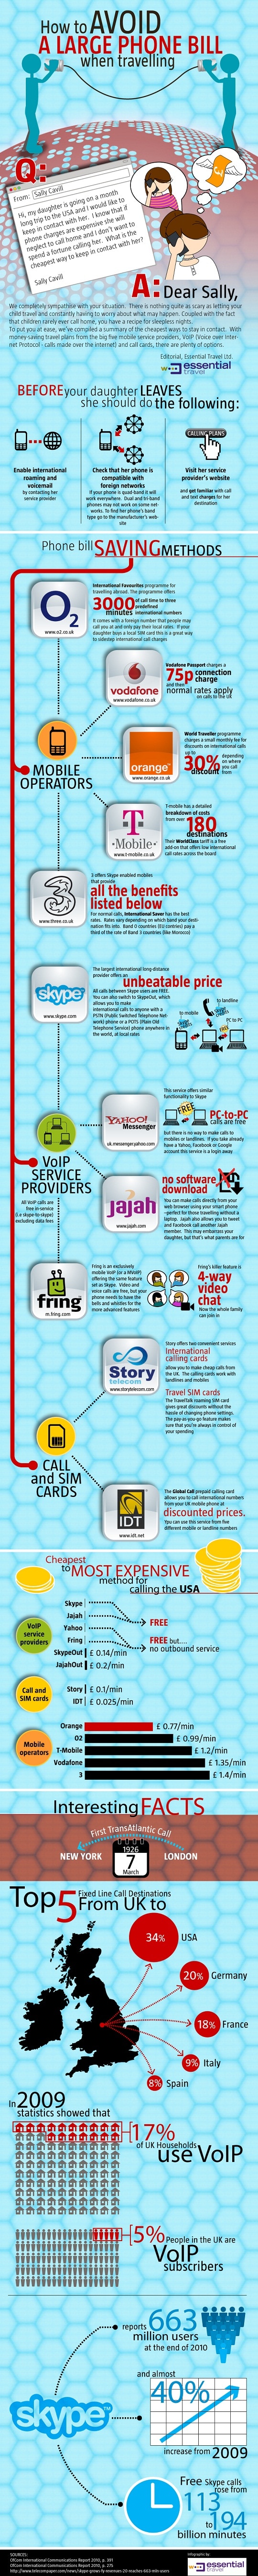 How To: Avoid Large Phone Bills When Traveling [Infographic]